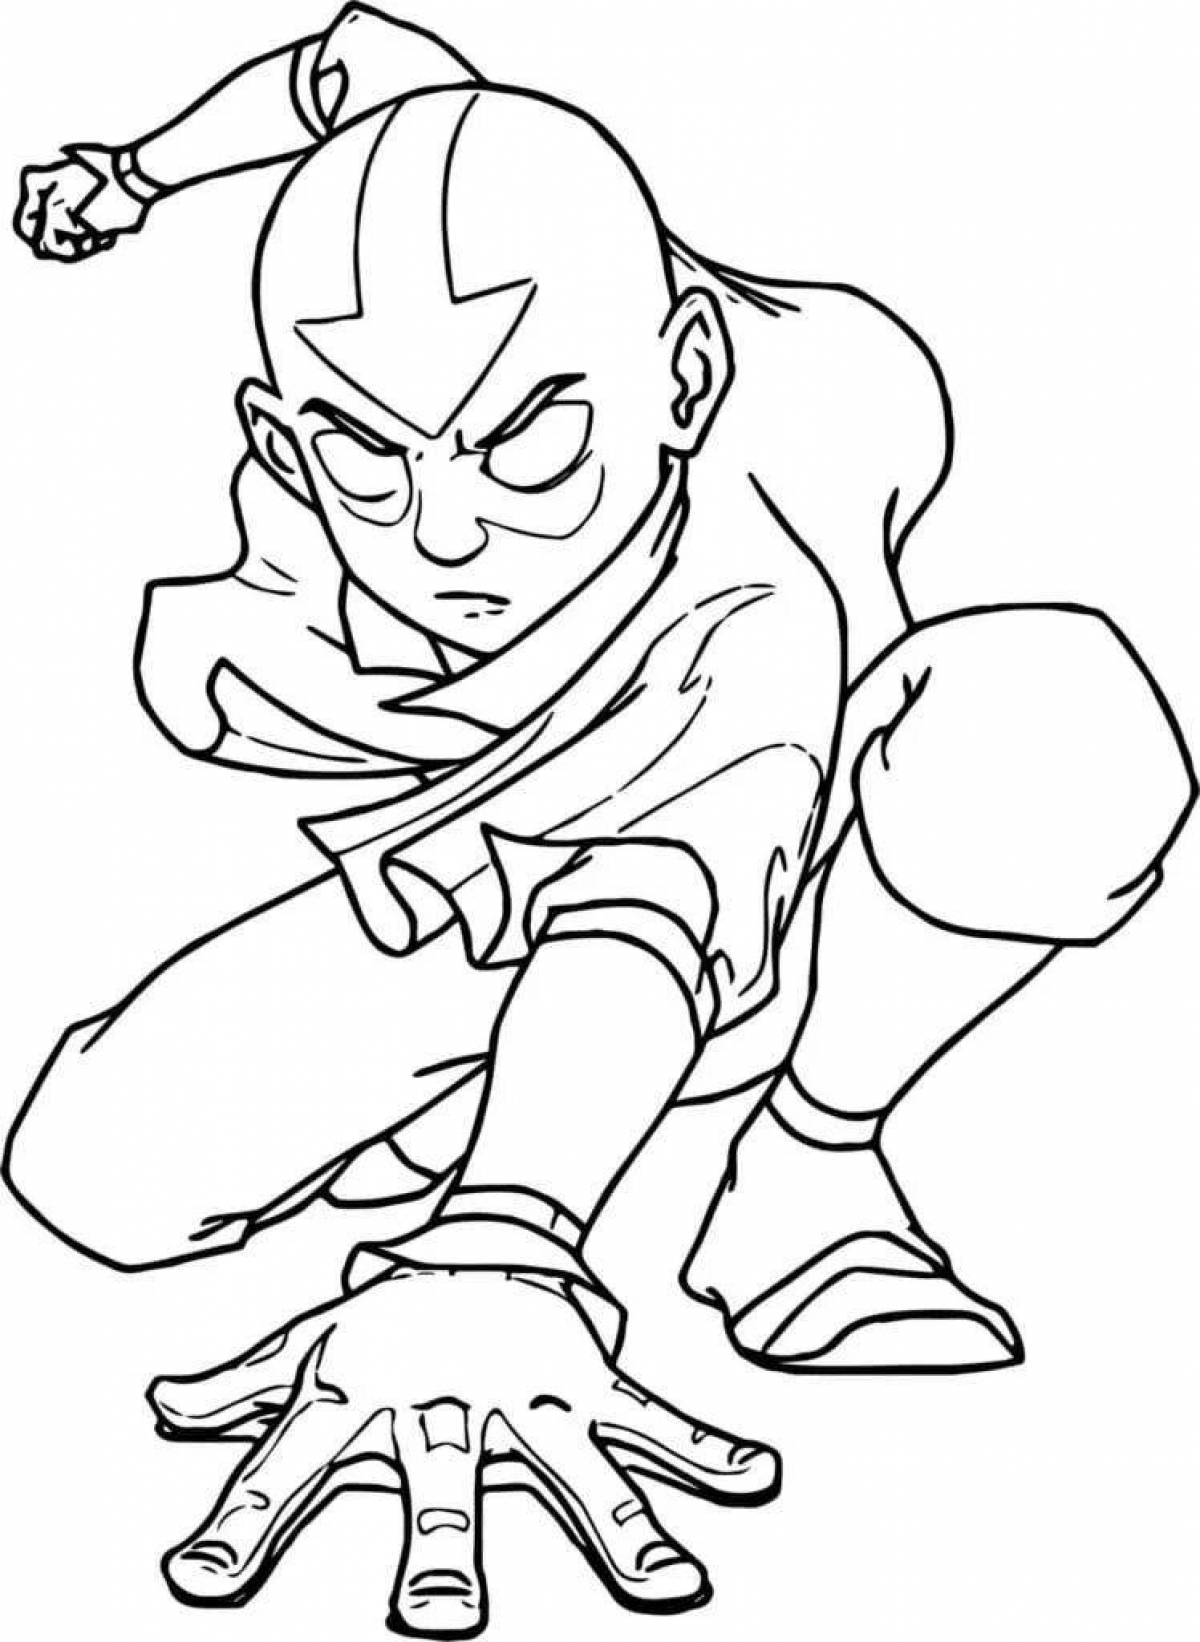 Colorful avatar coloring page